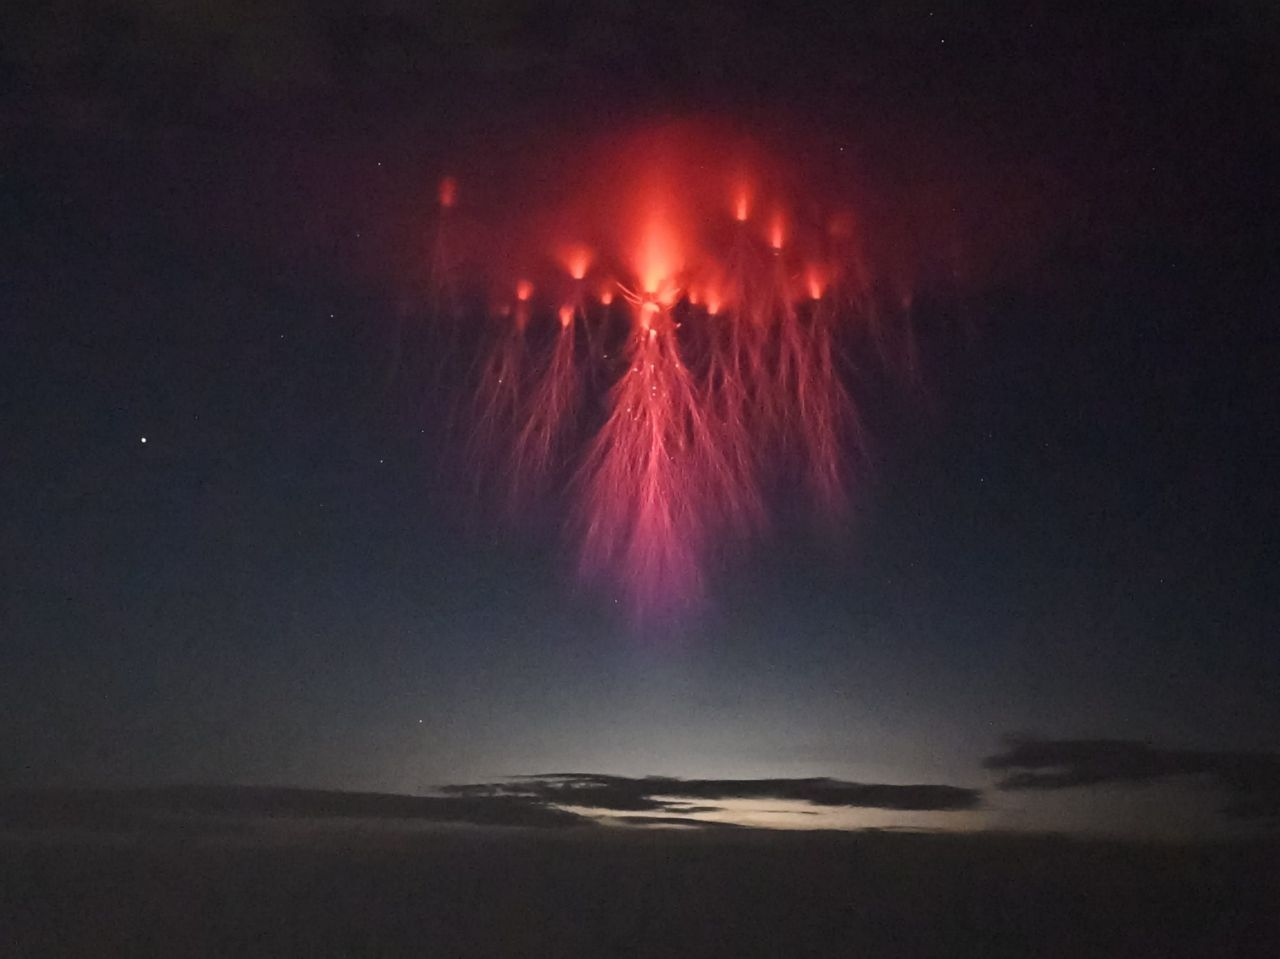 A spectacular image reveals the electrical tentacles of red jellyfish sprite lightning in the skies above Texas